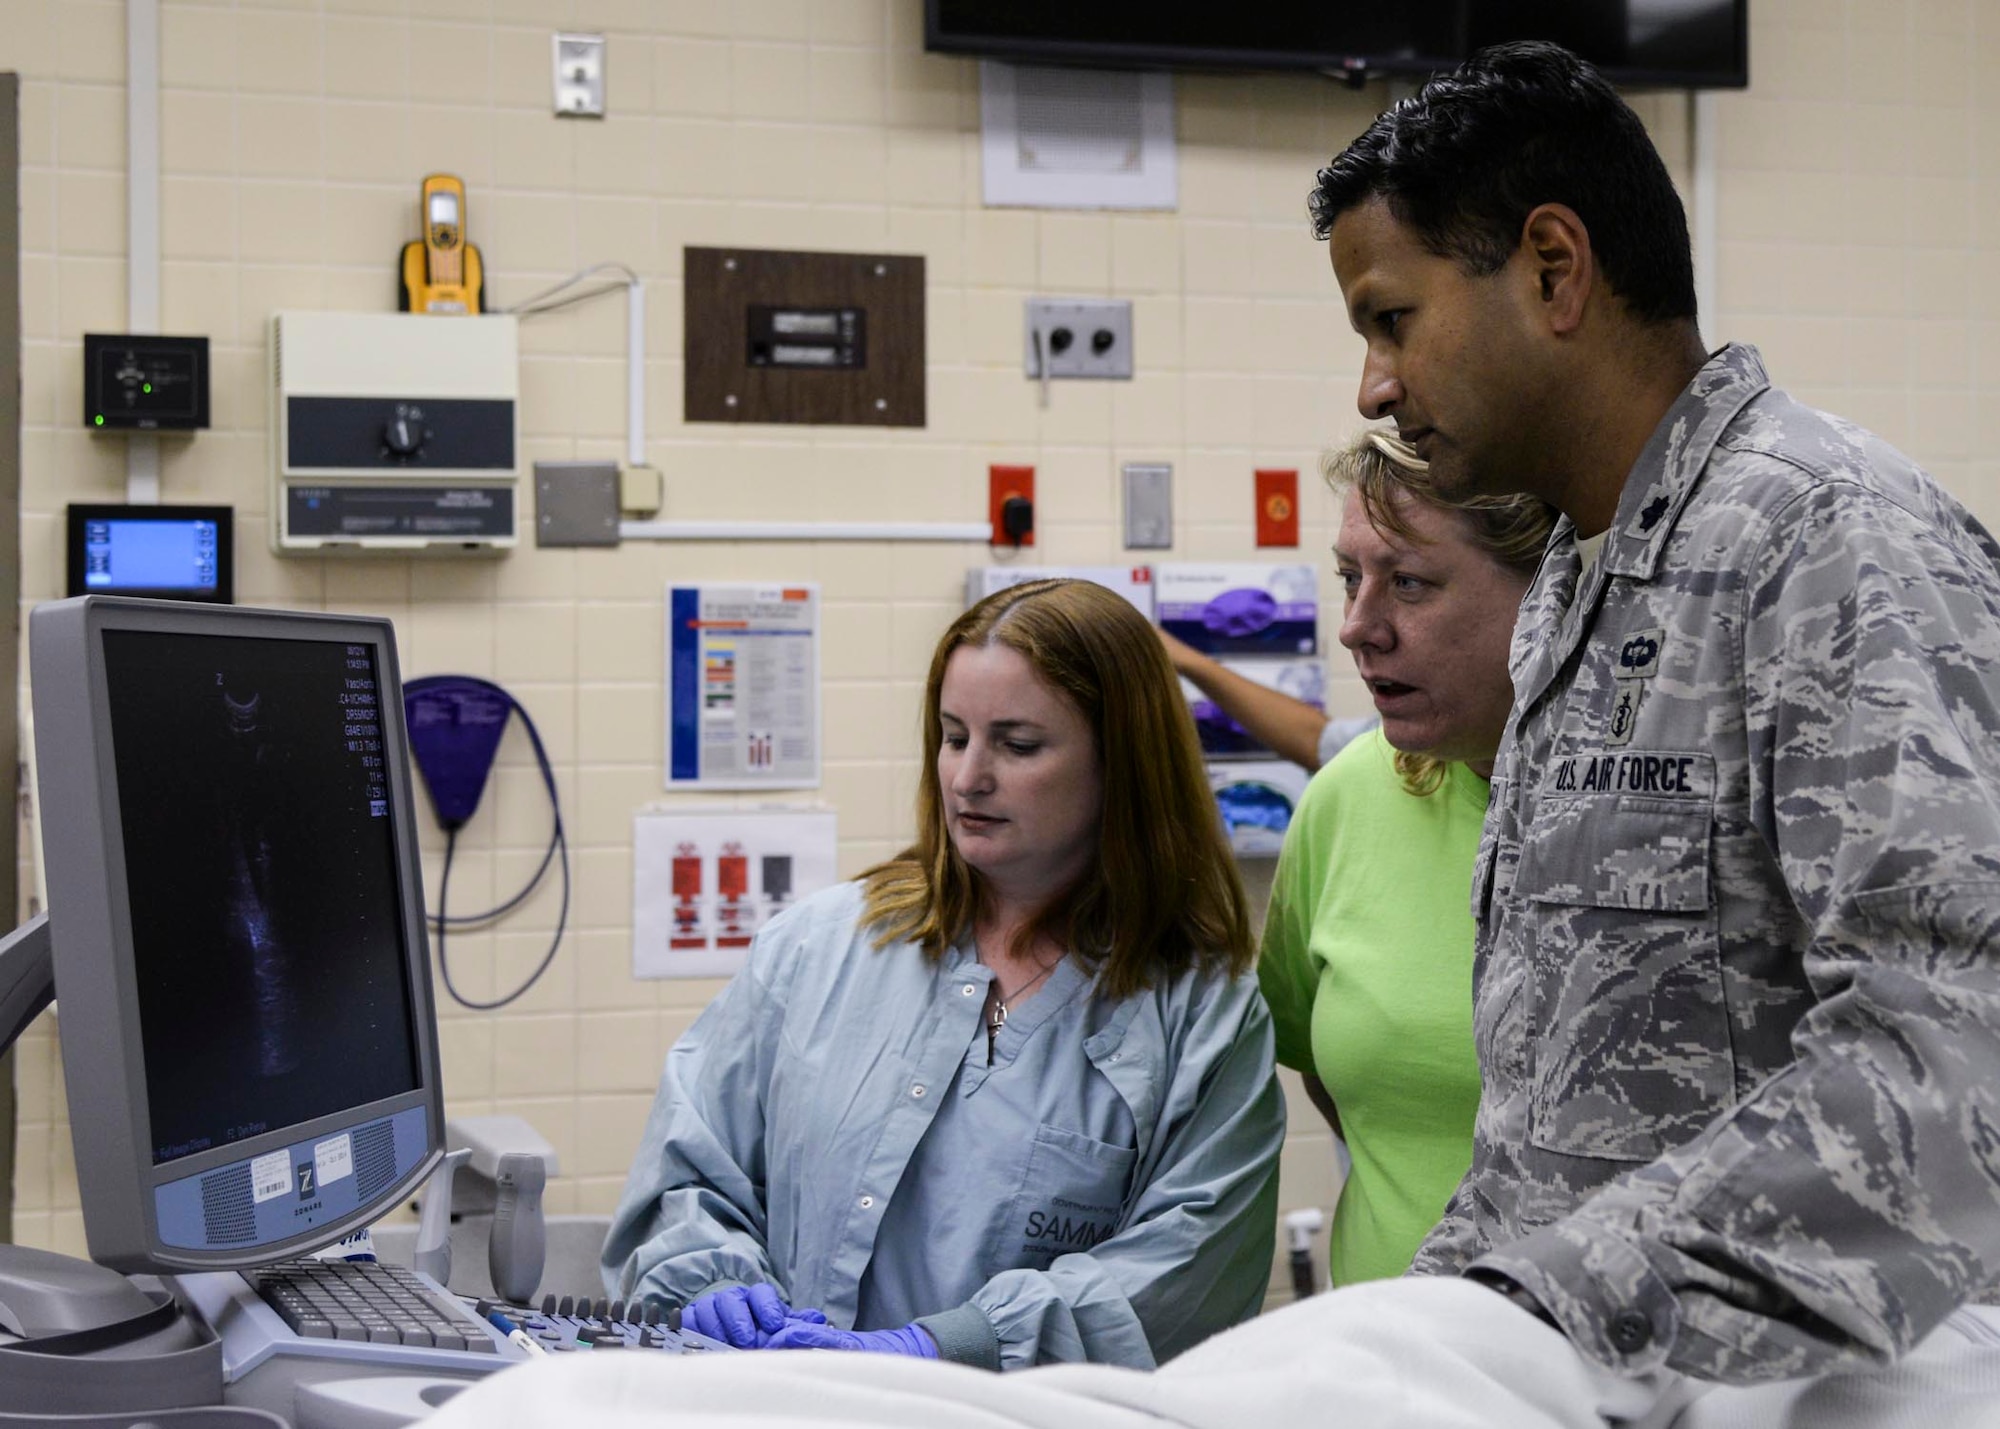 U.S. Air Force Lt. Col. Vikhyat Bebarta, director of the 59th Medical Wing En Route Care Research Center (ECRC) and chief of medical toxicology at the San Antonio Military Medical Center on nearby Joint Base San Antonio-Fort Sam Houston, runs an ultrasound on a patient with fellow research technicians at the Wilford Hall Ambulatory Surgical Center, Joint Base San Antonio-Lackland, Texas, July 22. Bebarta garnered the Gen. Paul W. Myers award and the National Society for Academic Emergency Medicine Basic Science award. (U.S. Air Force photo/Staff Sgt. Kevin Iinuma)